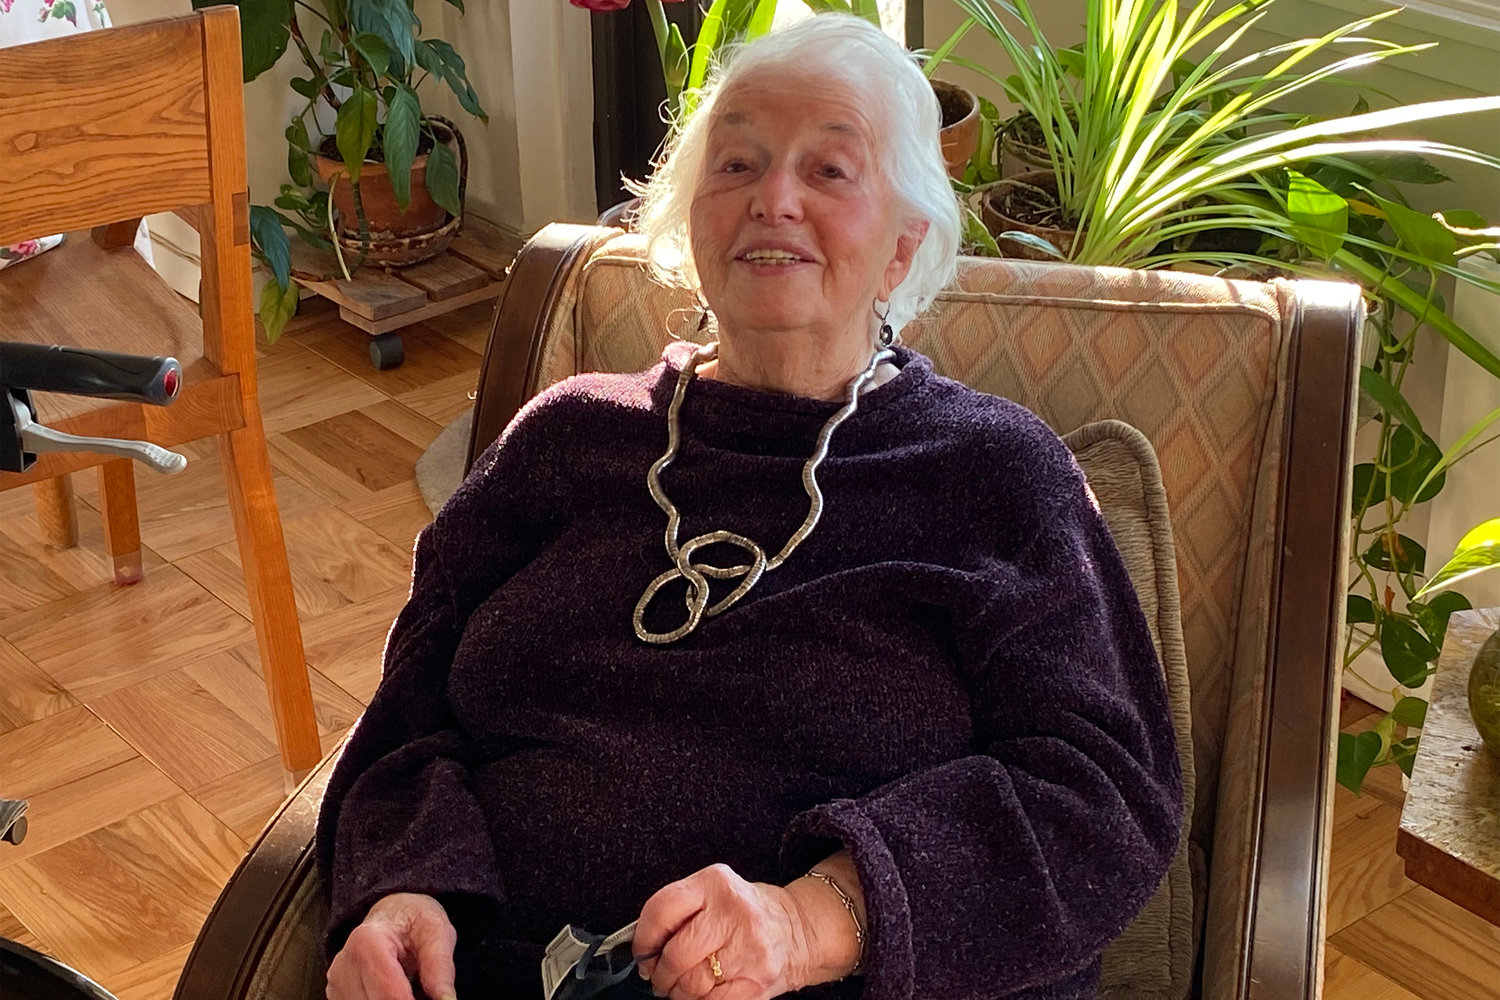 Deborah Berlinger Eiferman, who turned 100 last month, sits in her Riverdale home as she explained how her mother’s guidance and a lot positivity has helped her attain century mark.